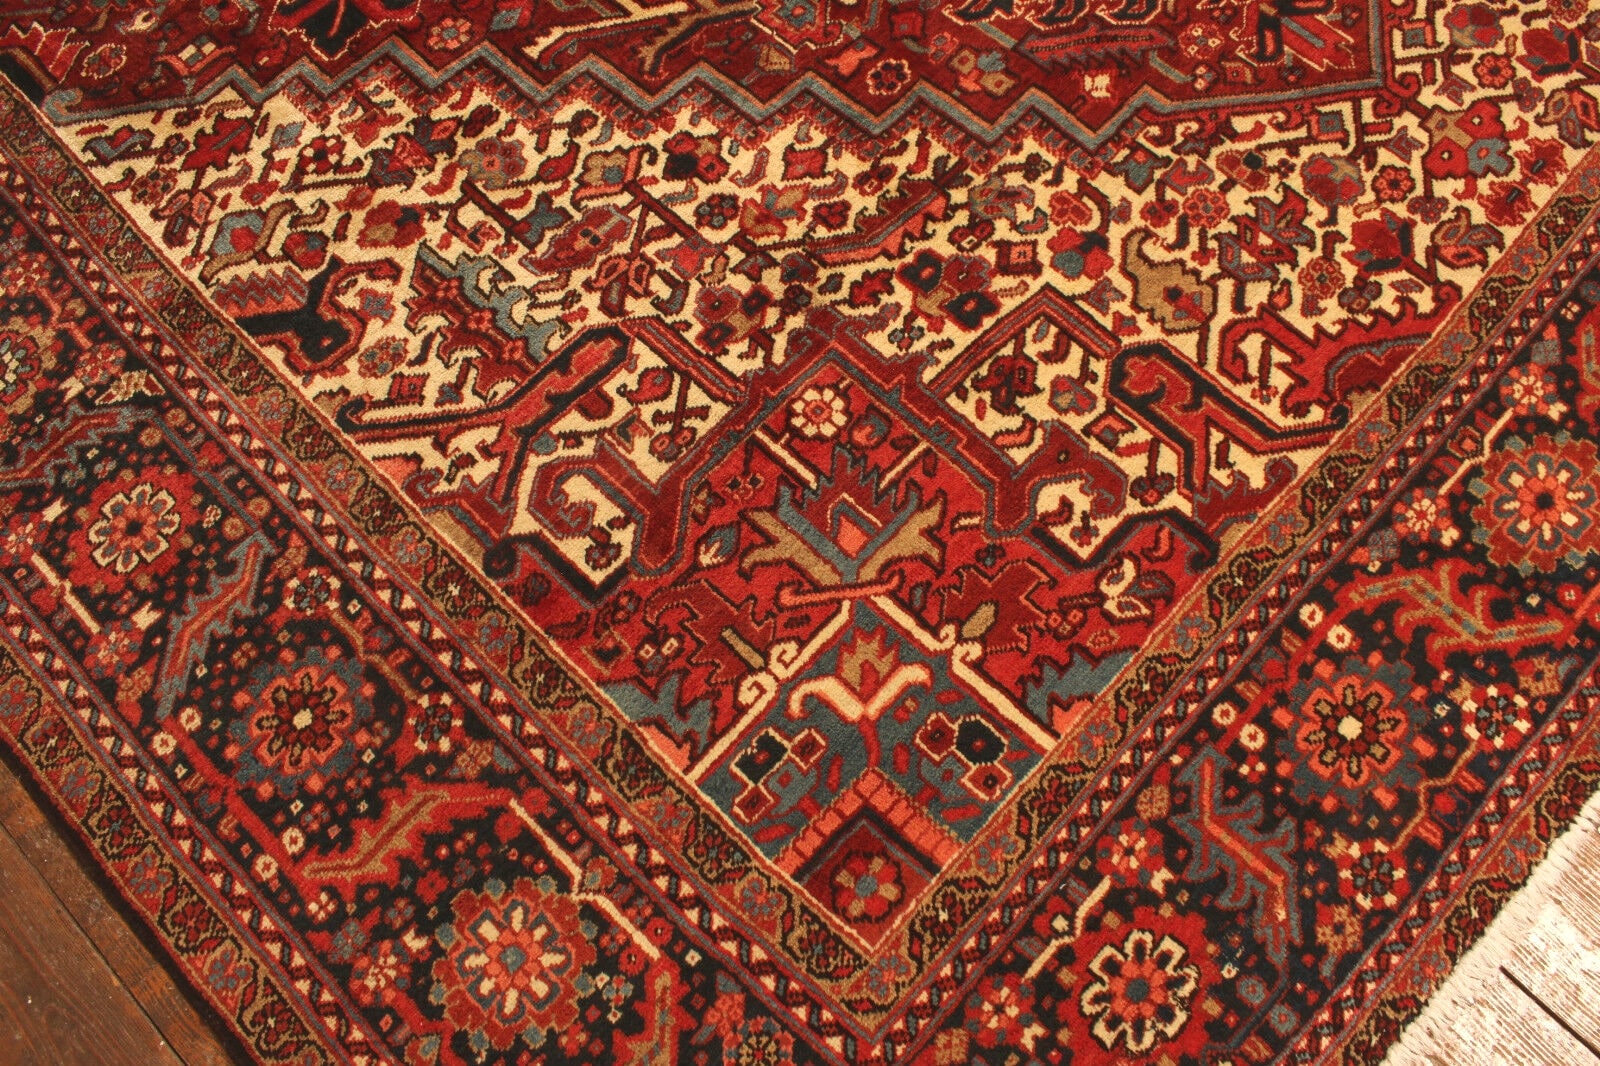 Artistic display of the Handmade Vintage Persian Style Heriz Rug as a room centerpiece